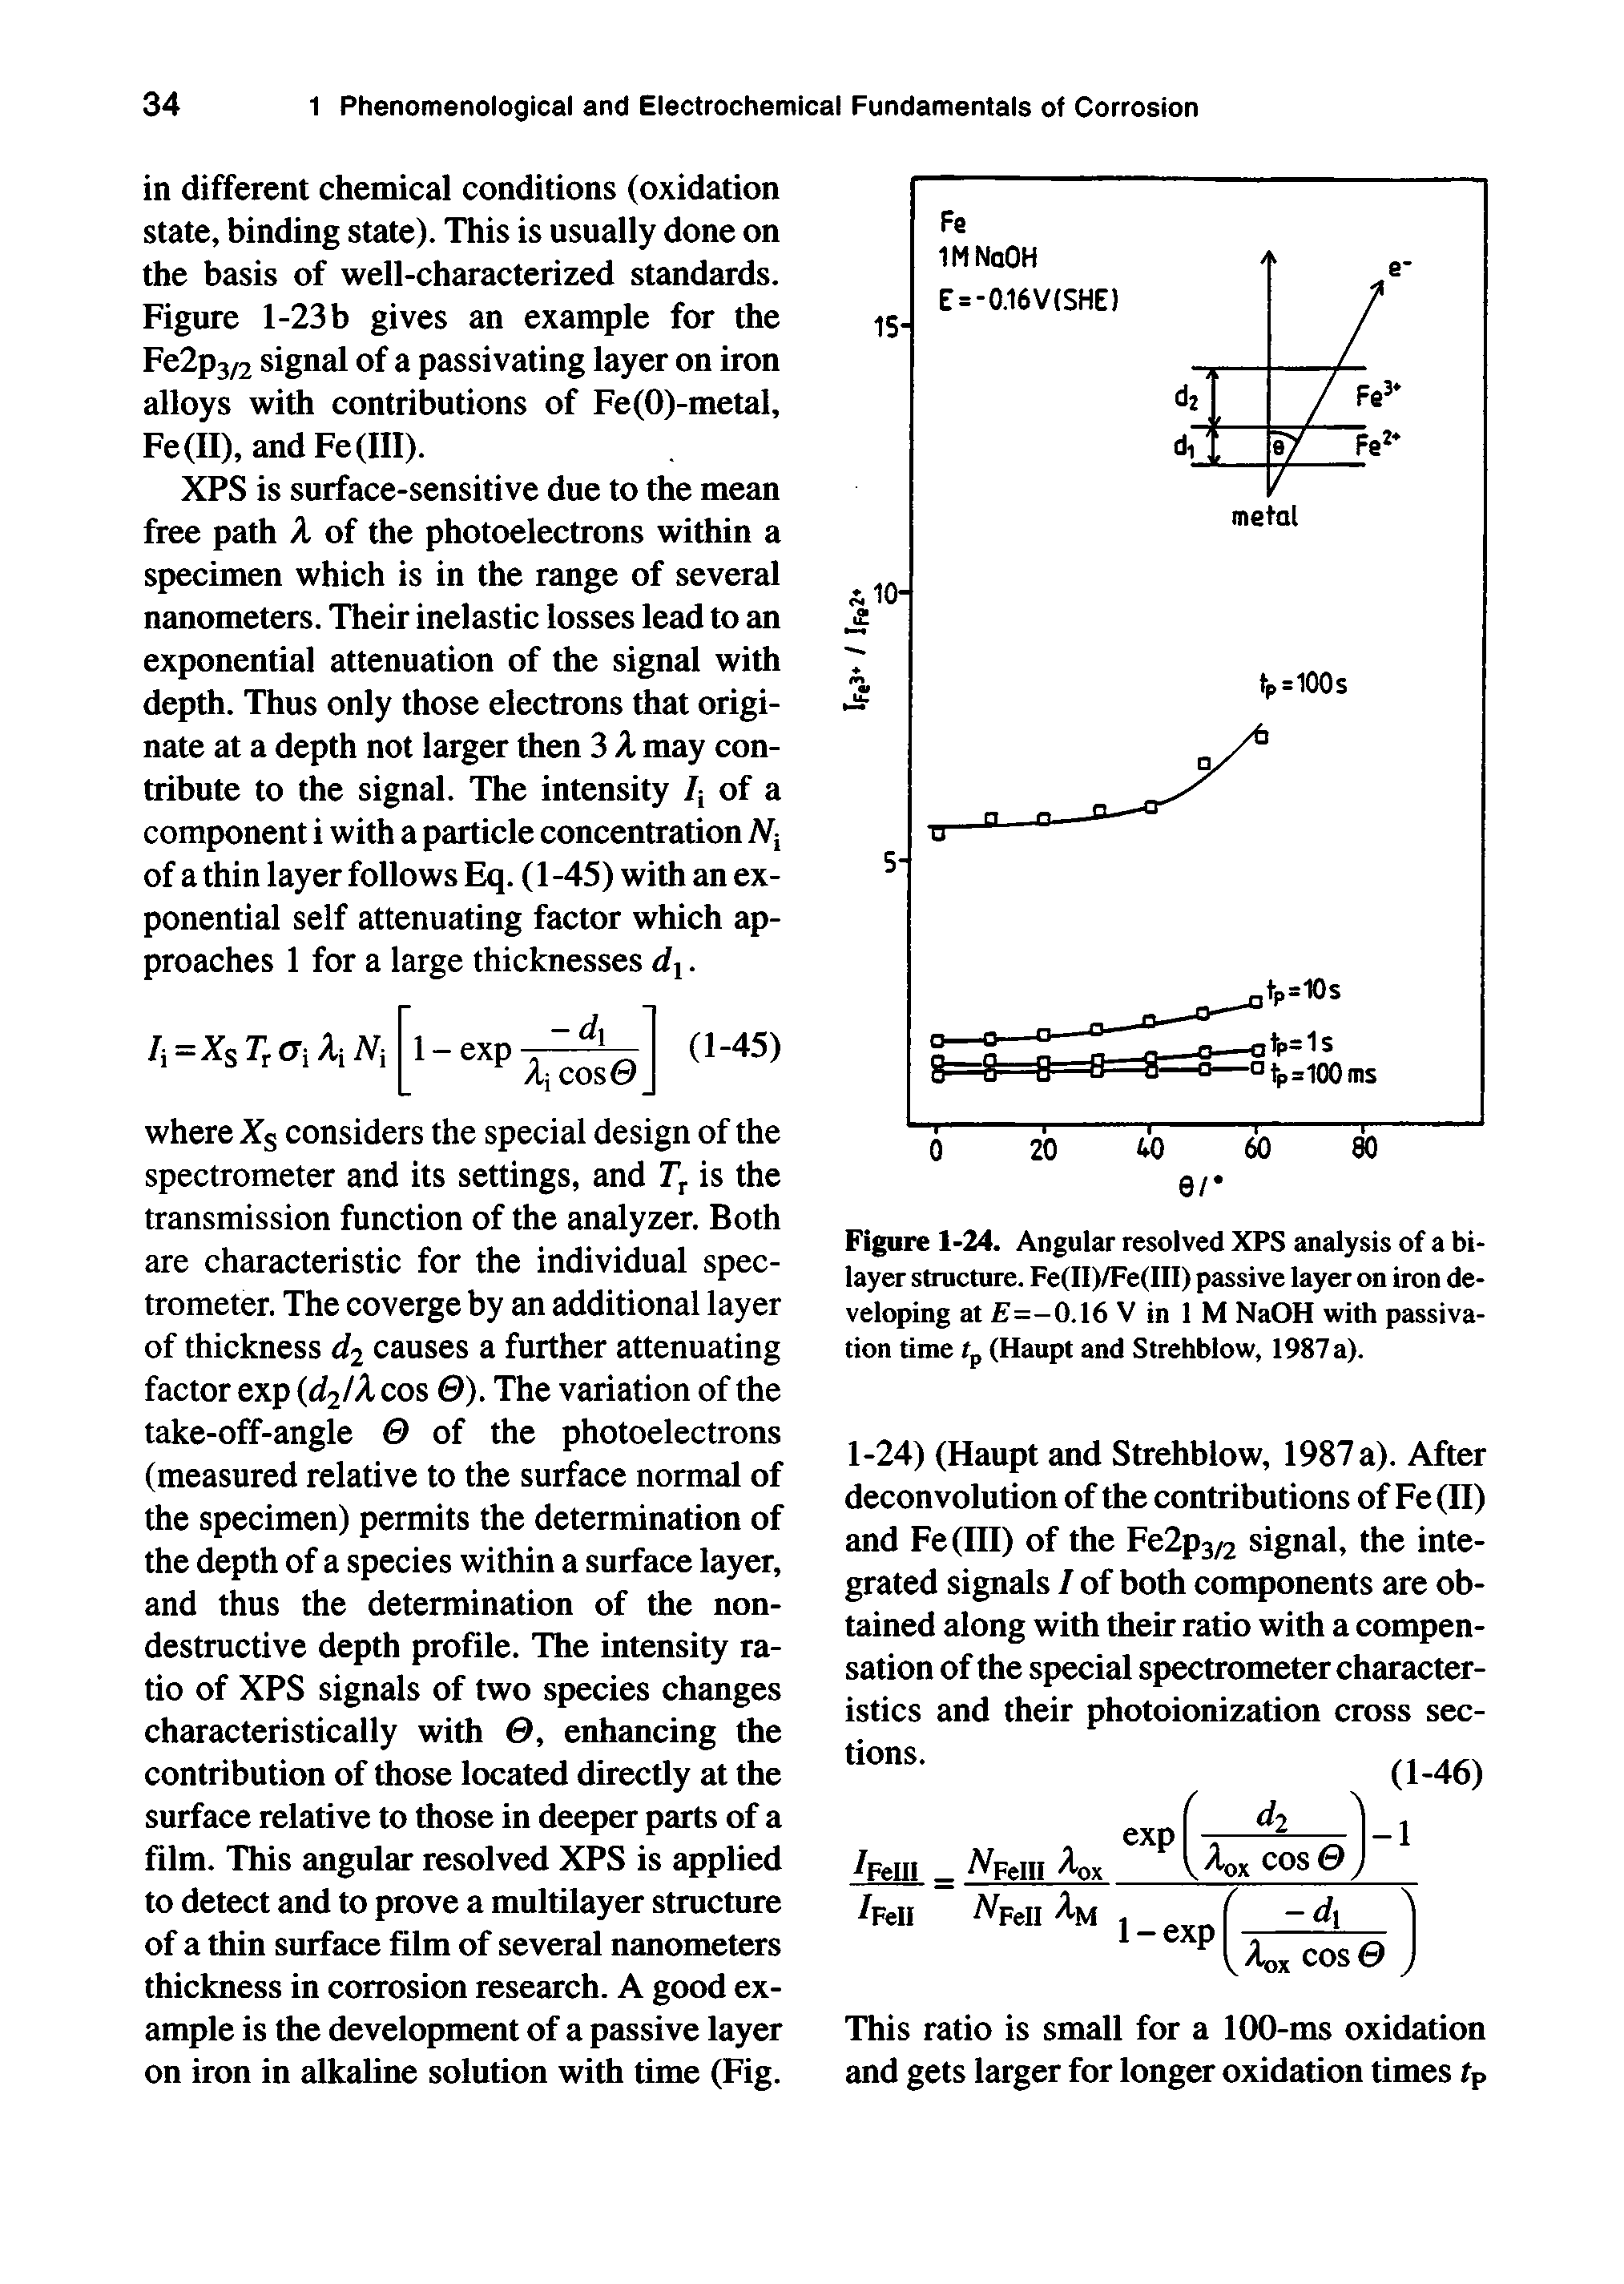 Figure 1-24. Angular resolved XPS analysis of a bilayer structure. Fe(II)/Fe(III) passive layer on iron developing at =-0.16 V in 1 M NaOH with passivation time tp (Haupt and Strehblow, 1987a).